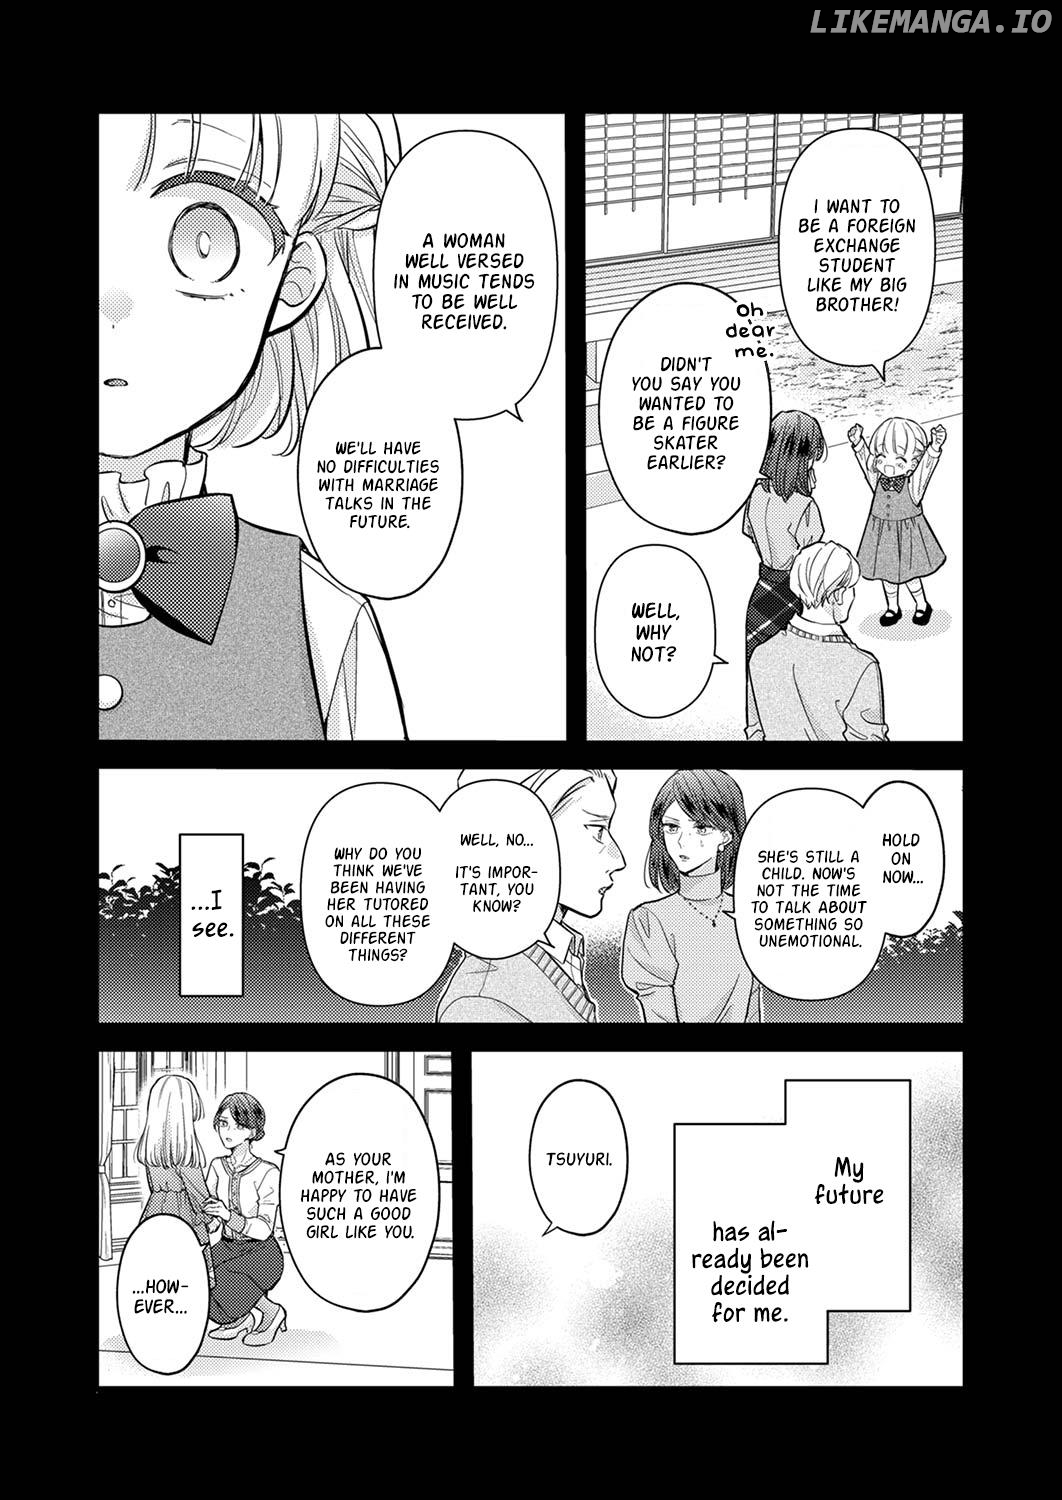 An Arranged Marriage Leads to Otaku Love Chapter 6 - page 9